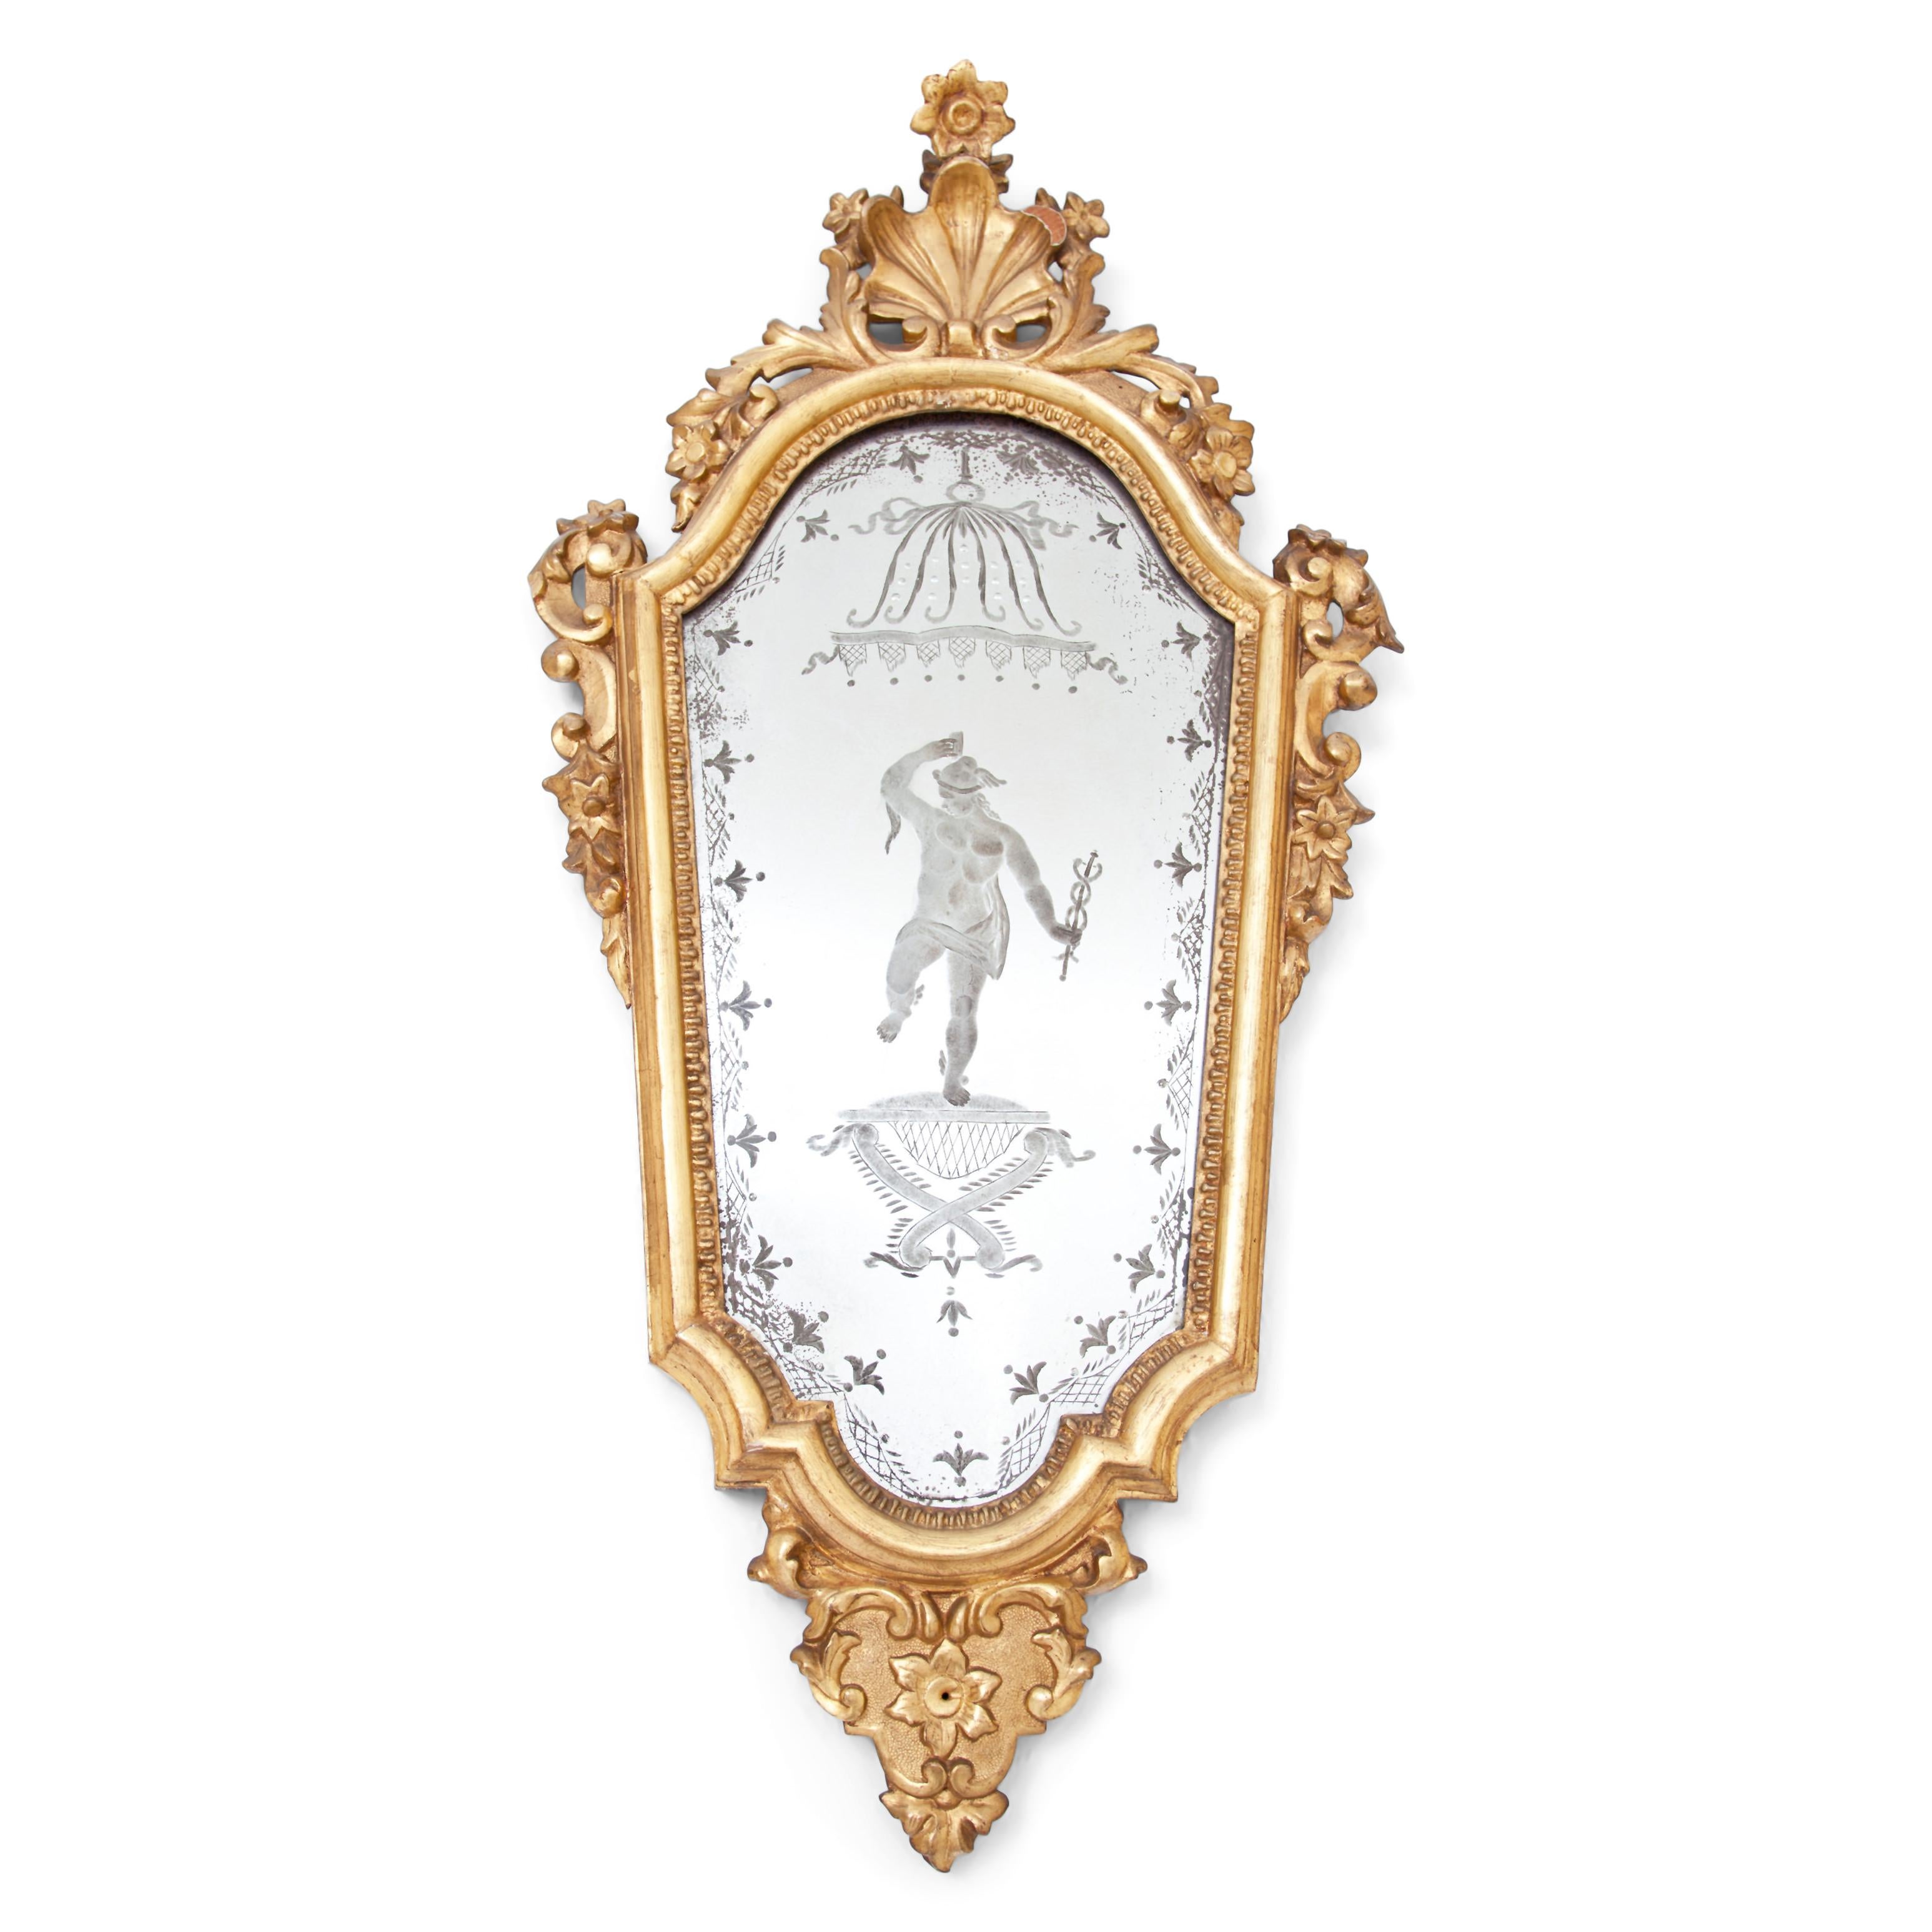 Pair of wall mirrors in gilded and stuccoed wooden frame with shell and flower decorations. The original mirror panes show carved decorations in the shape of Apollo and Nike. Gilding rubbed in places, otherwise in good condition.